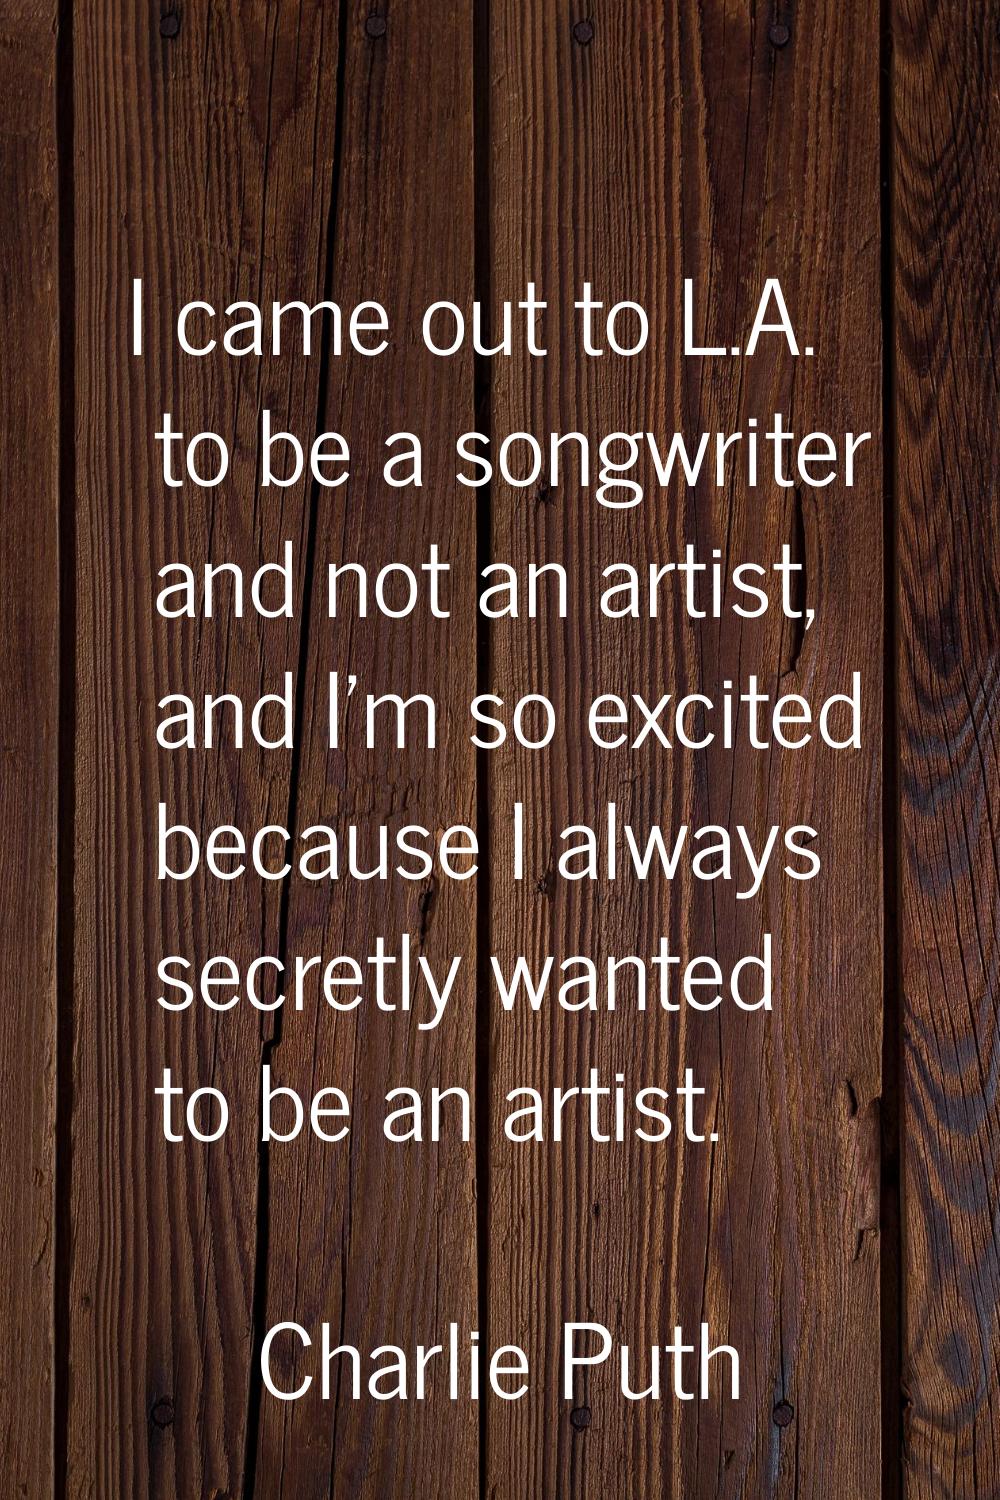 I came out to L.A. to be a songwriter and not an artist, and I'm so excited because I always secret